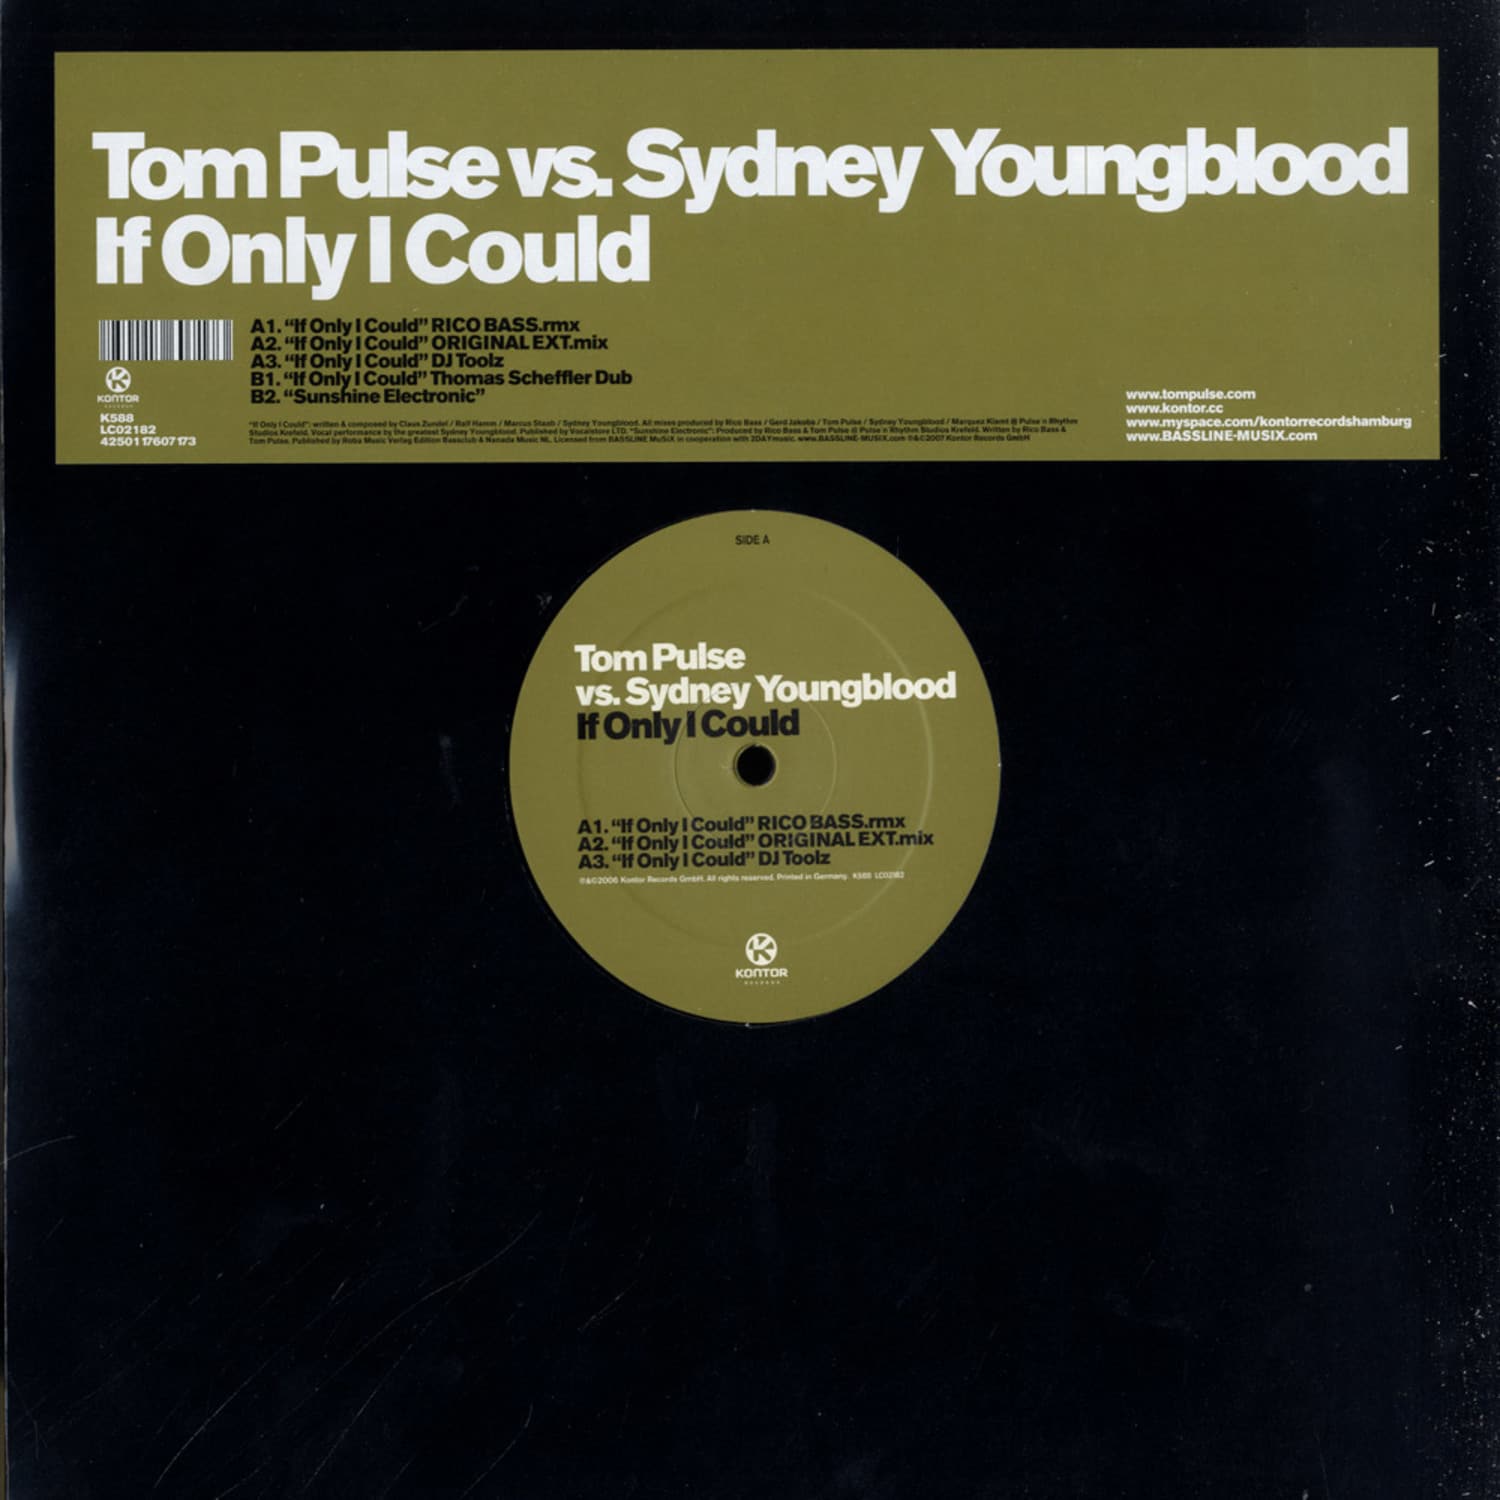 Tom Pulse vs Sydney Youngblood - IF ONLY I COULD